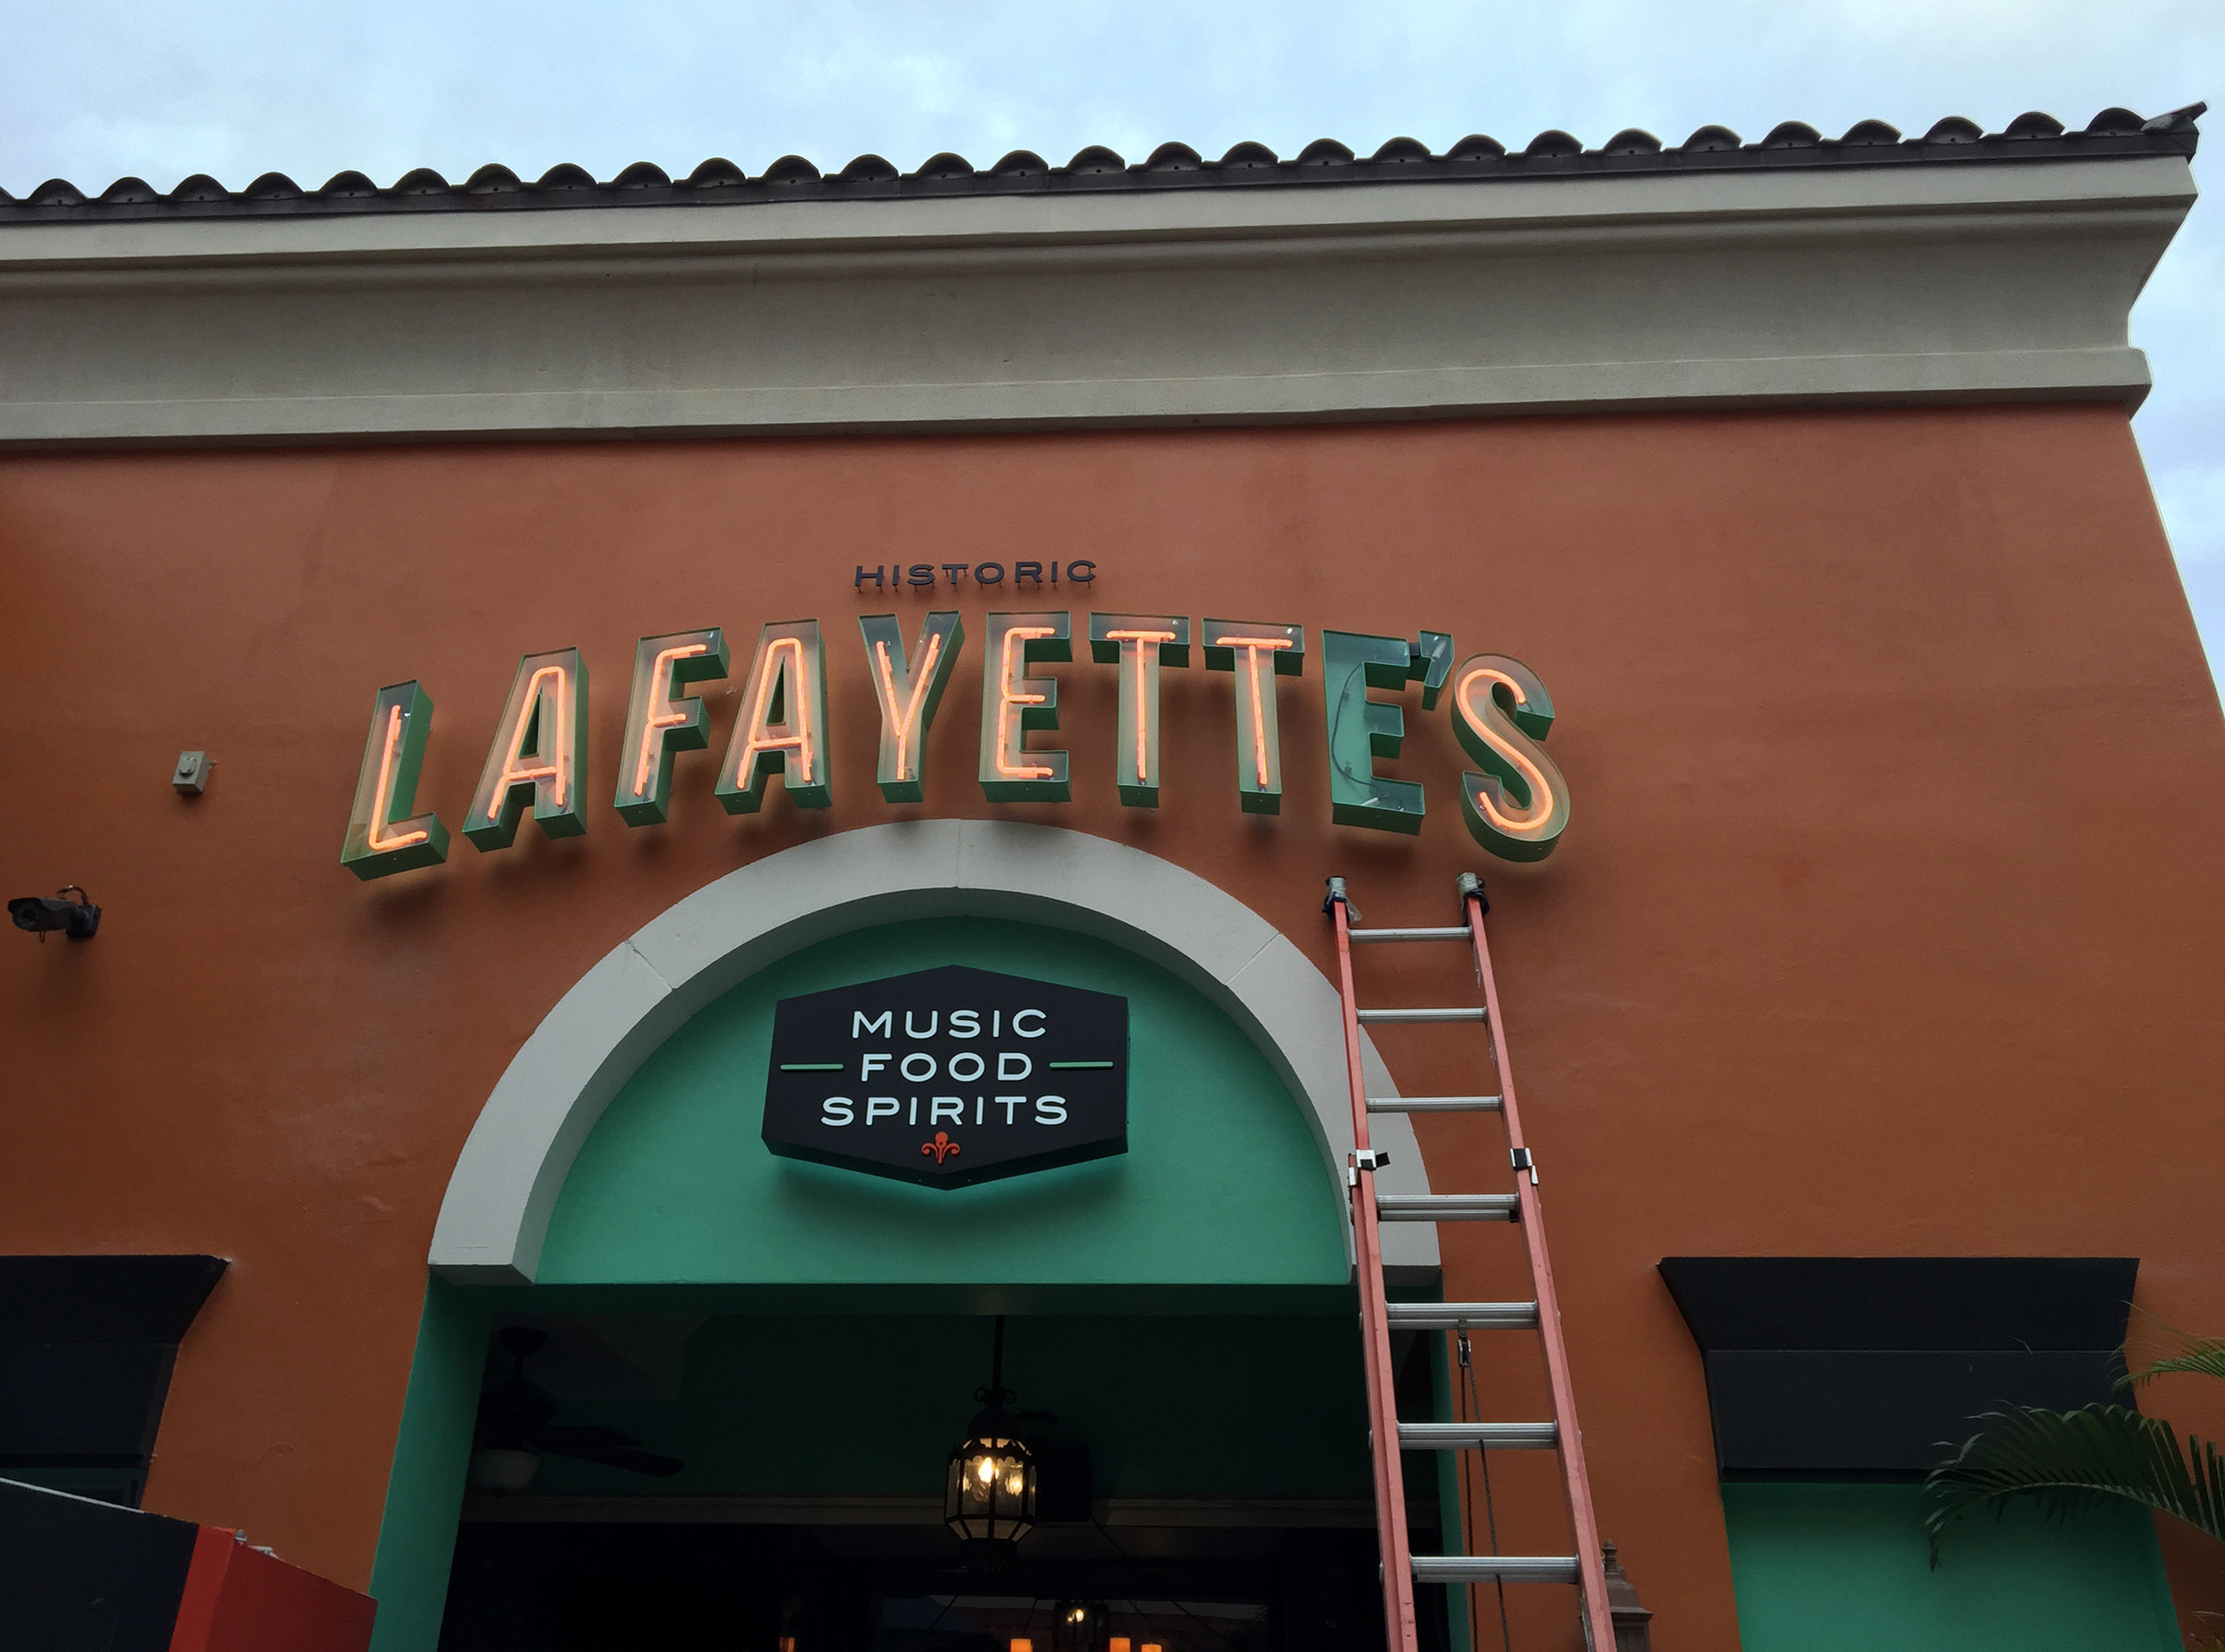  Lafayette’s Music Room signage  Creative and design by Chuck Mitchell  West Palm Beach, Florida 